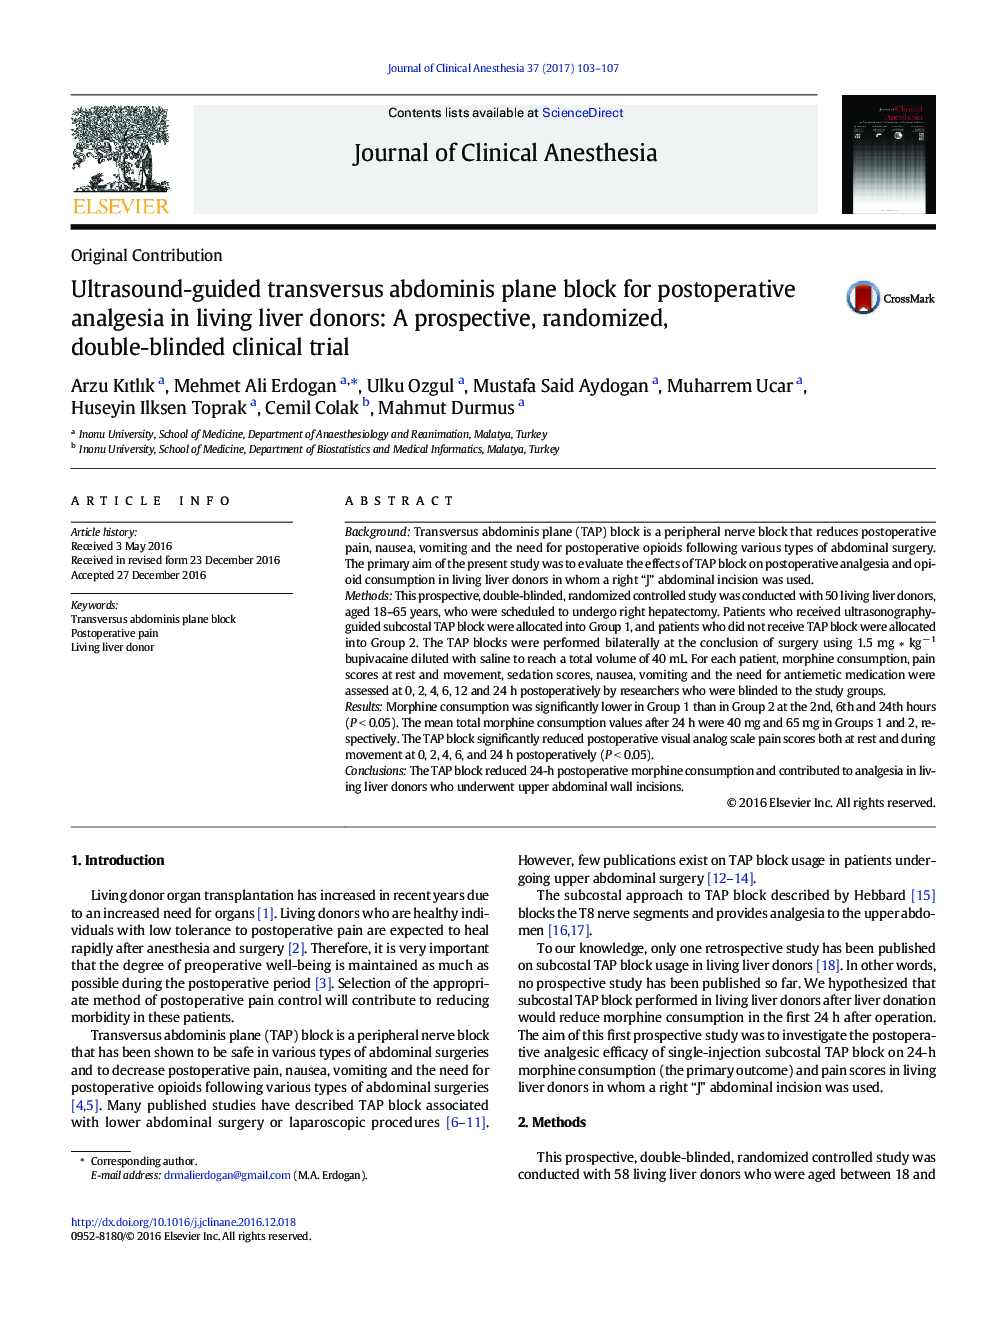 Ultrasound-guided transversus abdominis plane block for postoperative analgesia in living liver donors: A prospective, randomized, double-blinded clinical trial